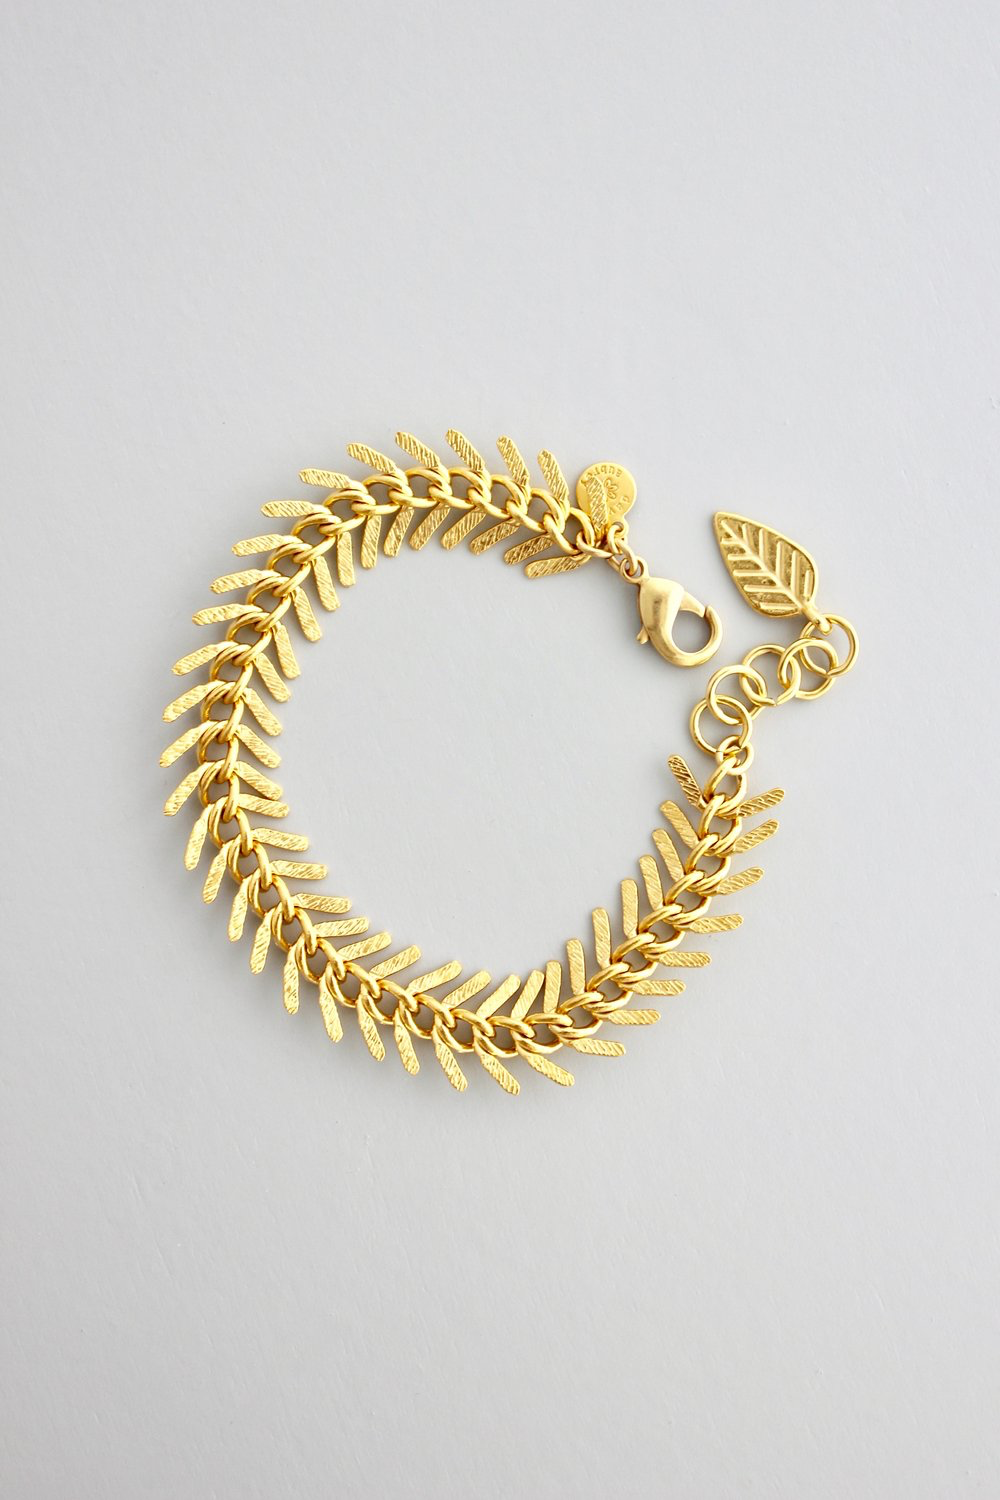 Satin Brass and Chains Collection – David Aubrey Jewelry